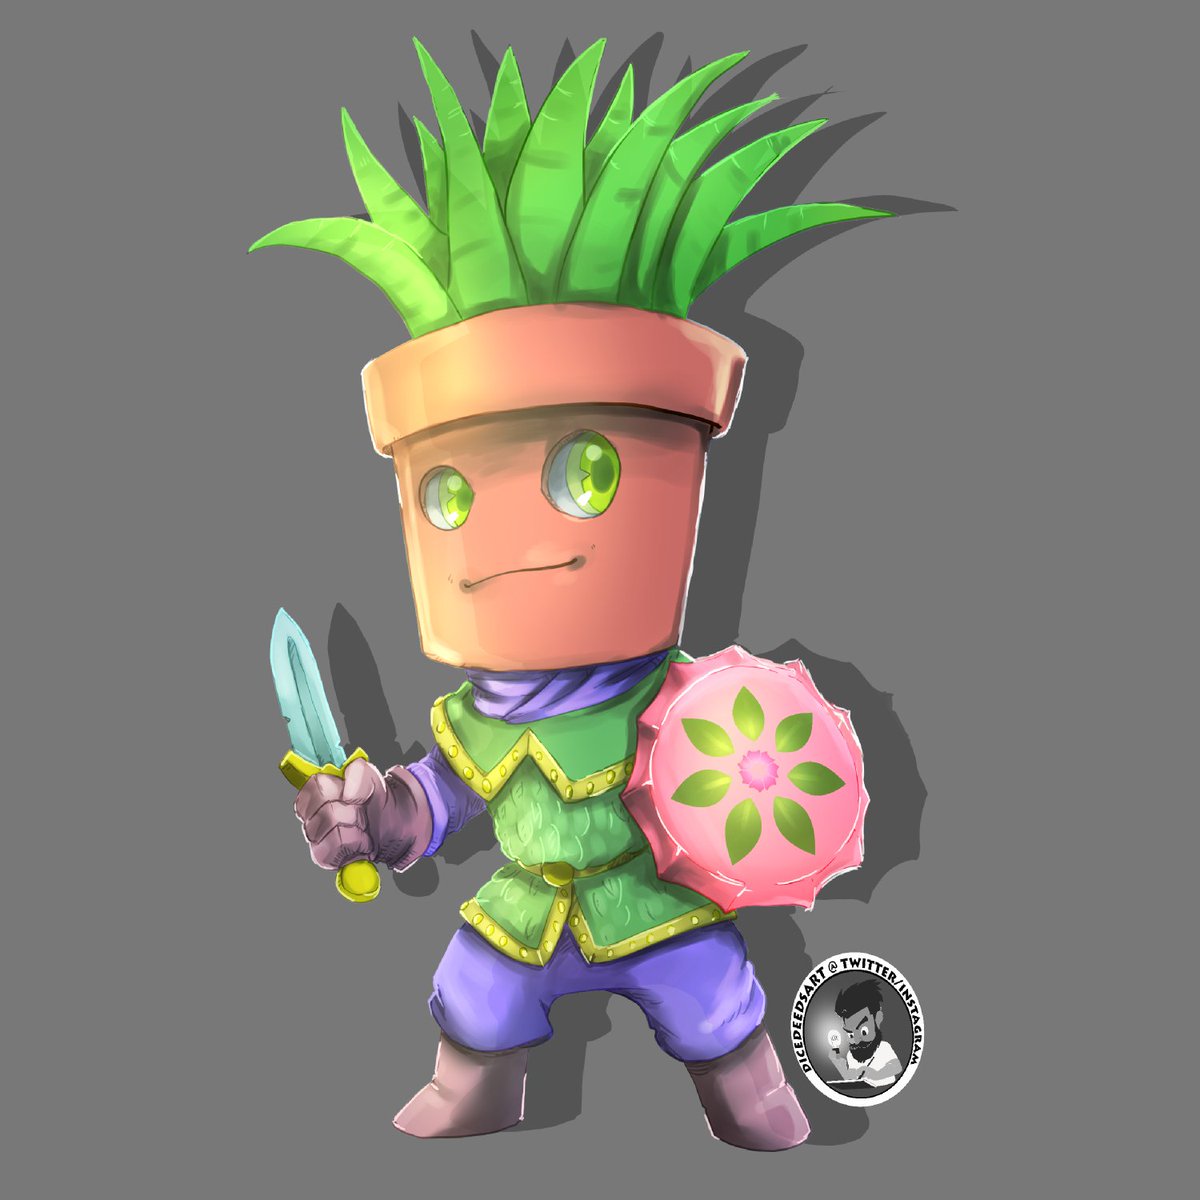 DiceDeedsArt on Twitter: "Little pot plant warrior. February, going against years of inability, I'm going to start a garden. One plant at a time. . . #Garden #illustration #